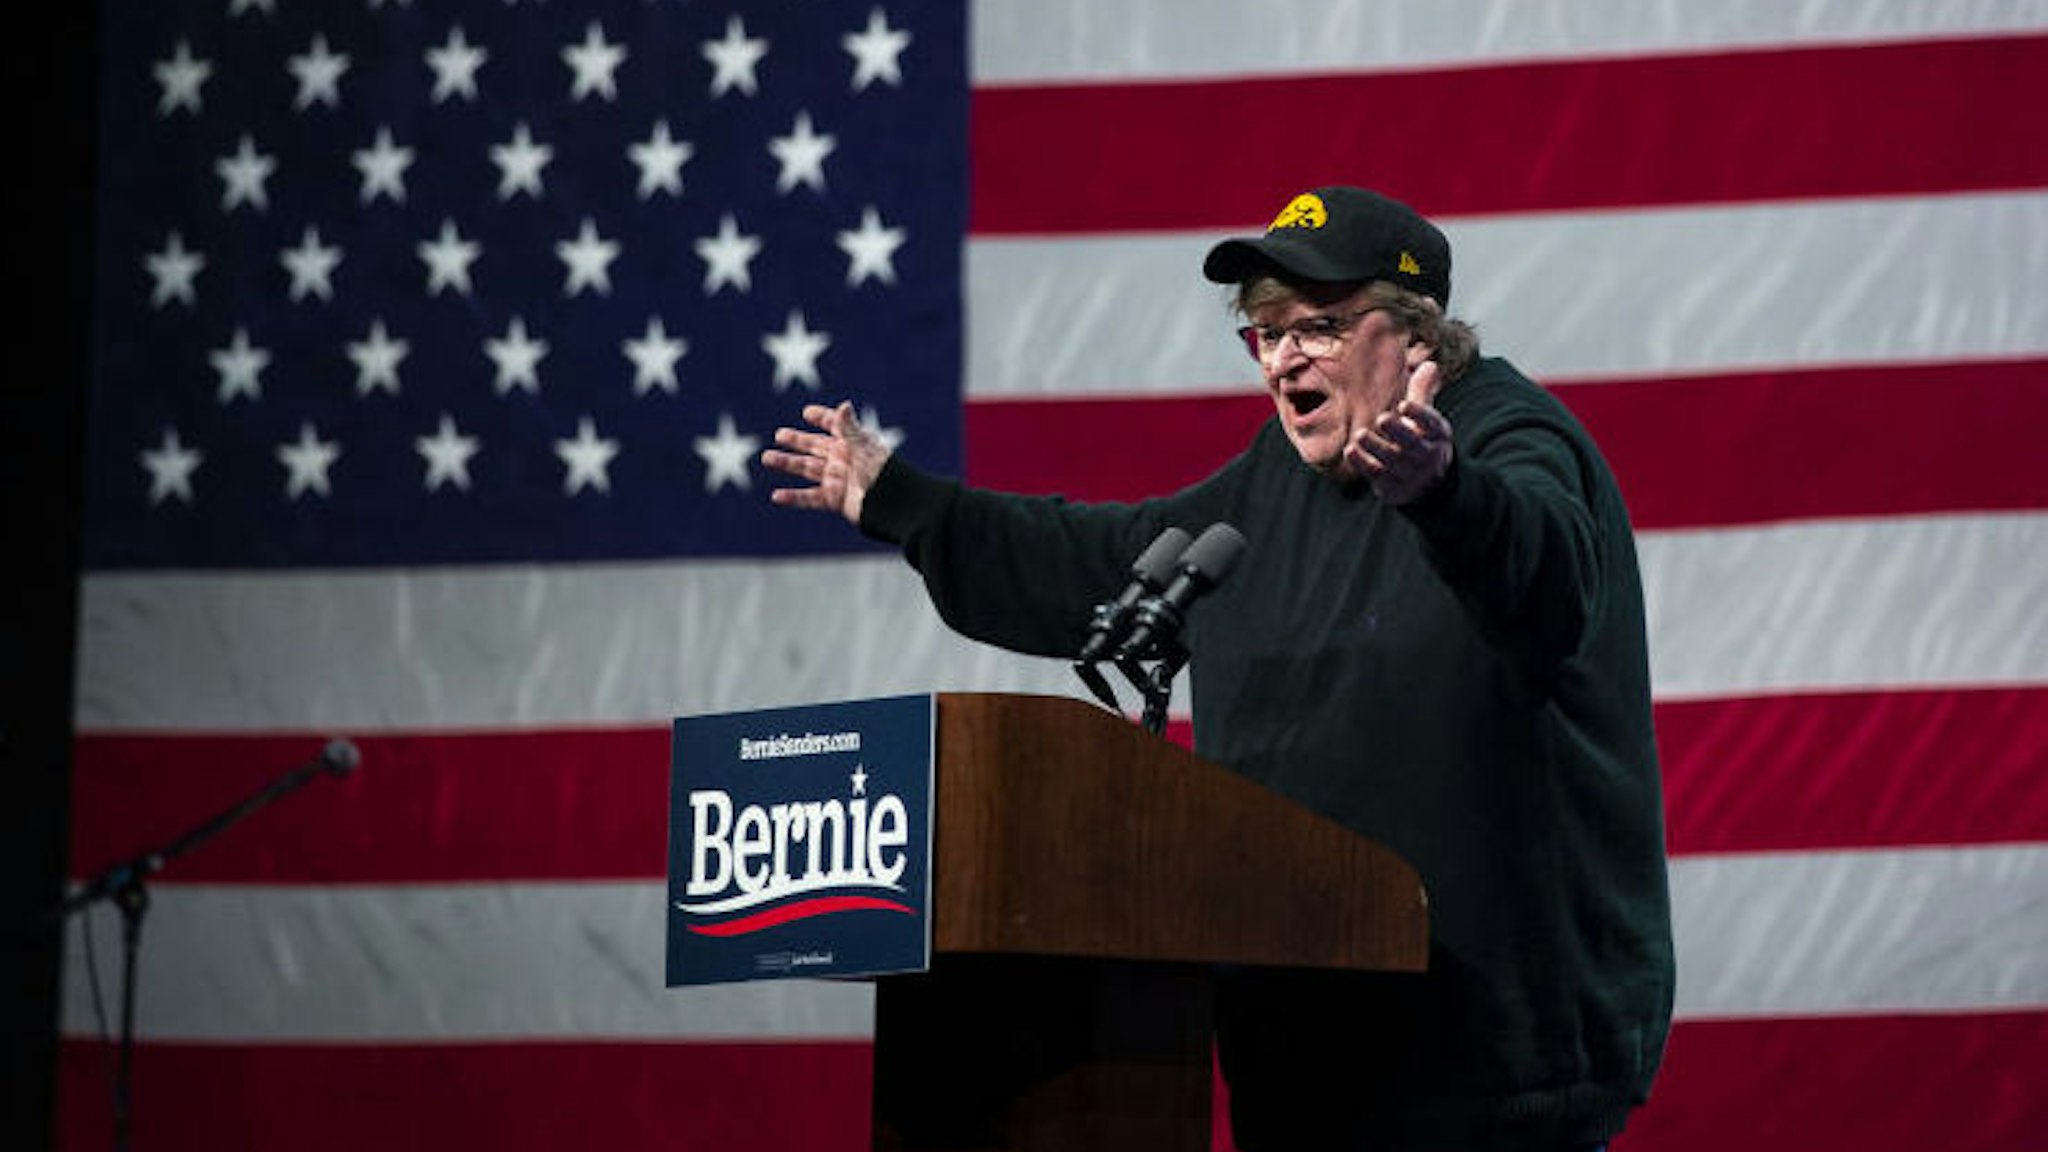 Michael Moore, American filmmaker, speaks during a campaign event for Senator Bernie Sanders, an independent from Vermont and 2020 presidential candidate, in Clive, Iowa, U.S., on Friday, Jan. 31, 2020. The increasing likelihood that Sanders could win Monday's first-in-the-nation caucus threatens to fundamentally redraw the path to the Democratic presidential nomination and challenge the conventional wisdom that there are only "three tickets out of Iowa." Photographer: Al Drago/Bloomberg